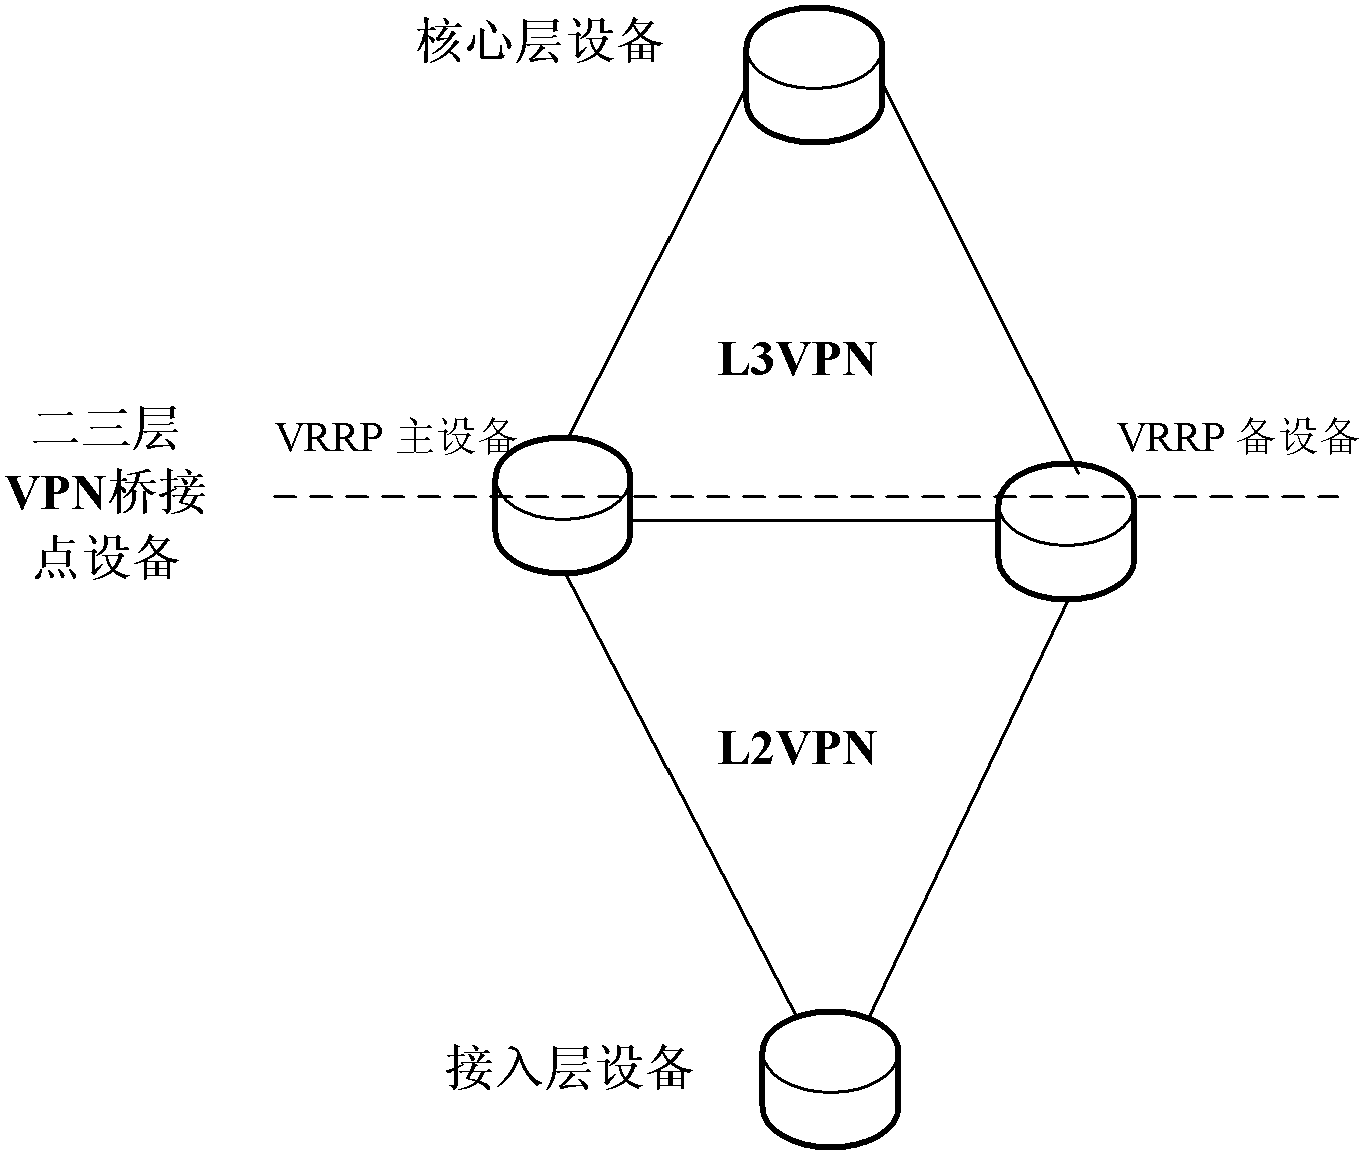 Method for synchronizing ARP (address resolution protocol) tables between master and slave VRRP (virtual router redundancy protocol) devices and VRRP device